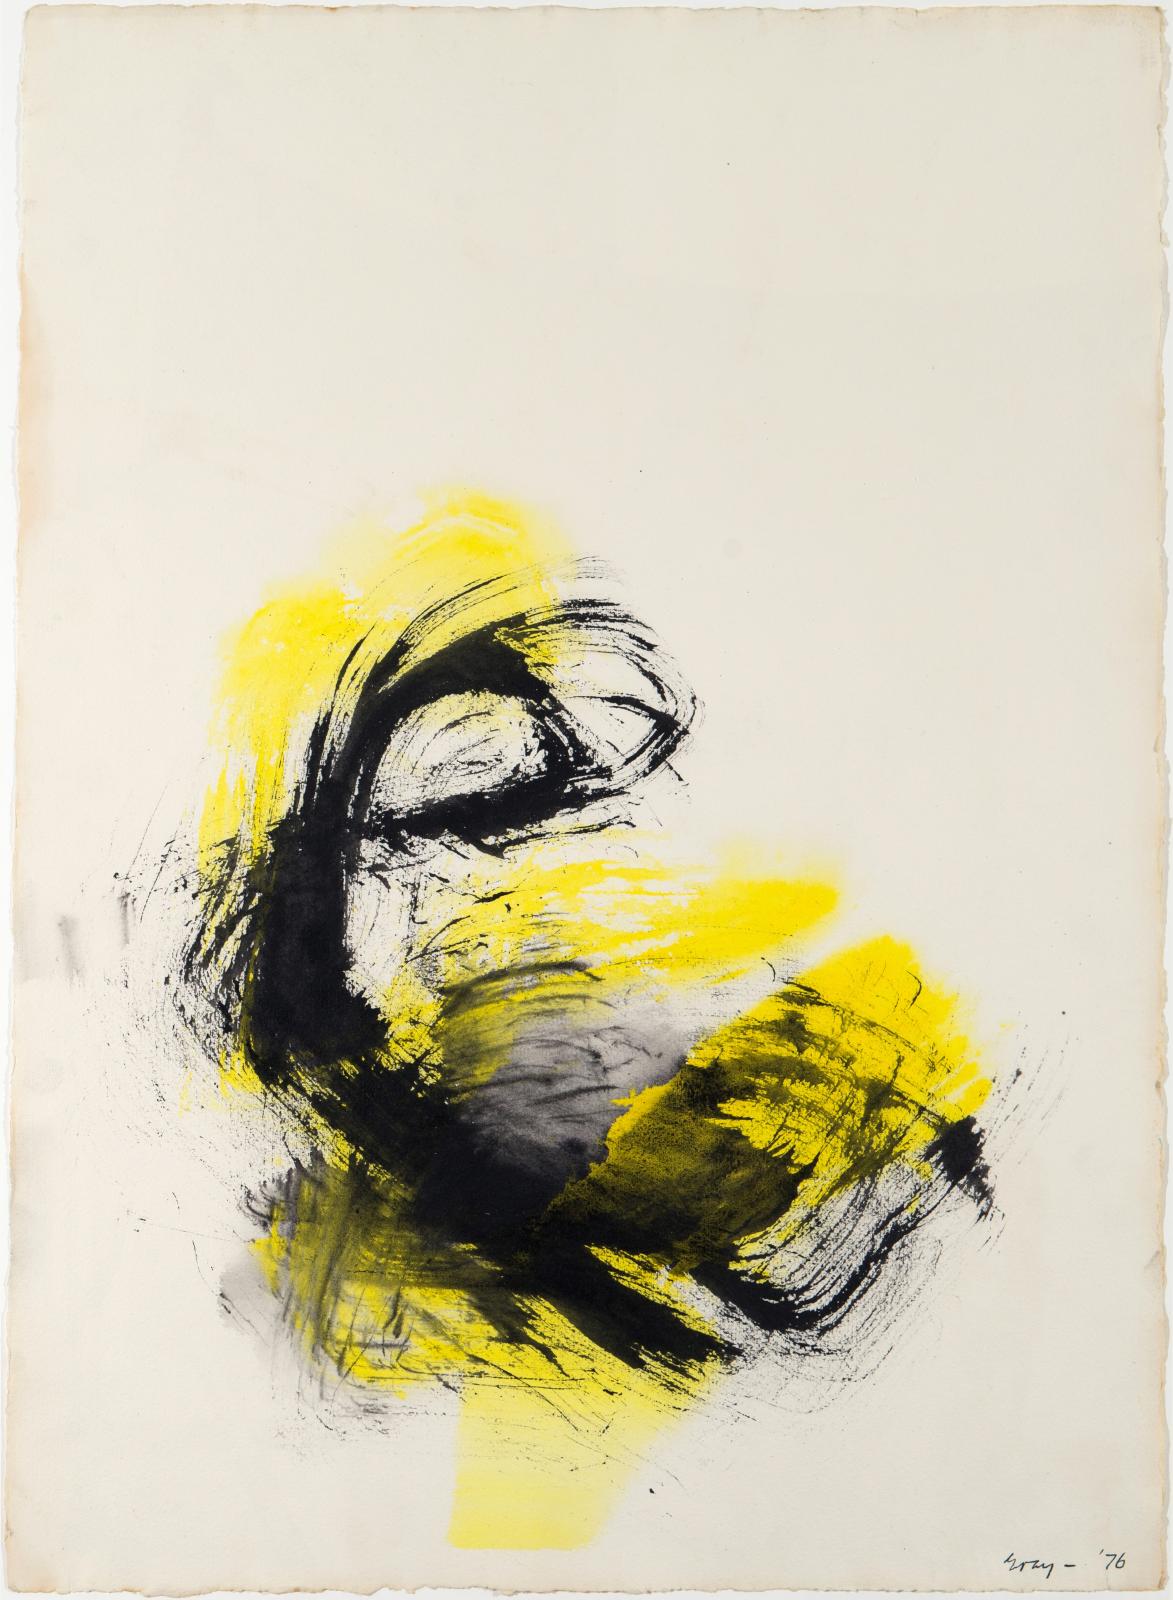 Cleve Gray, Gesture: Yellow, Black, 1976